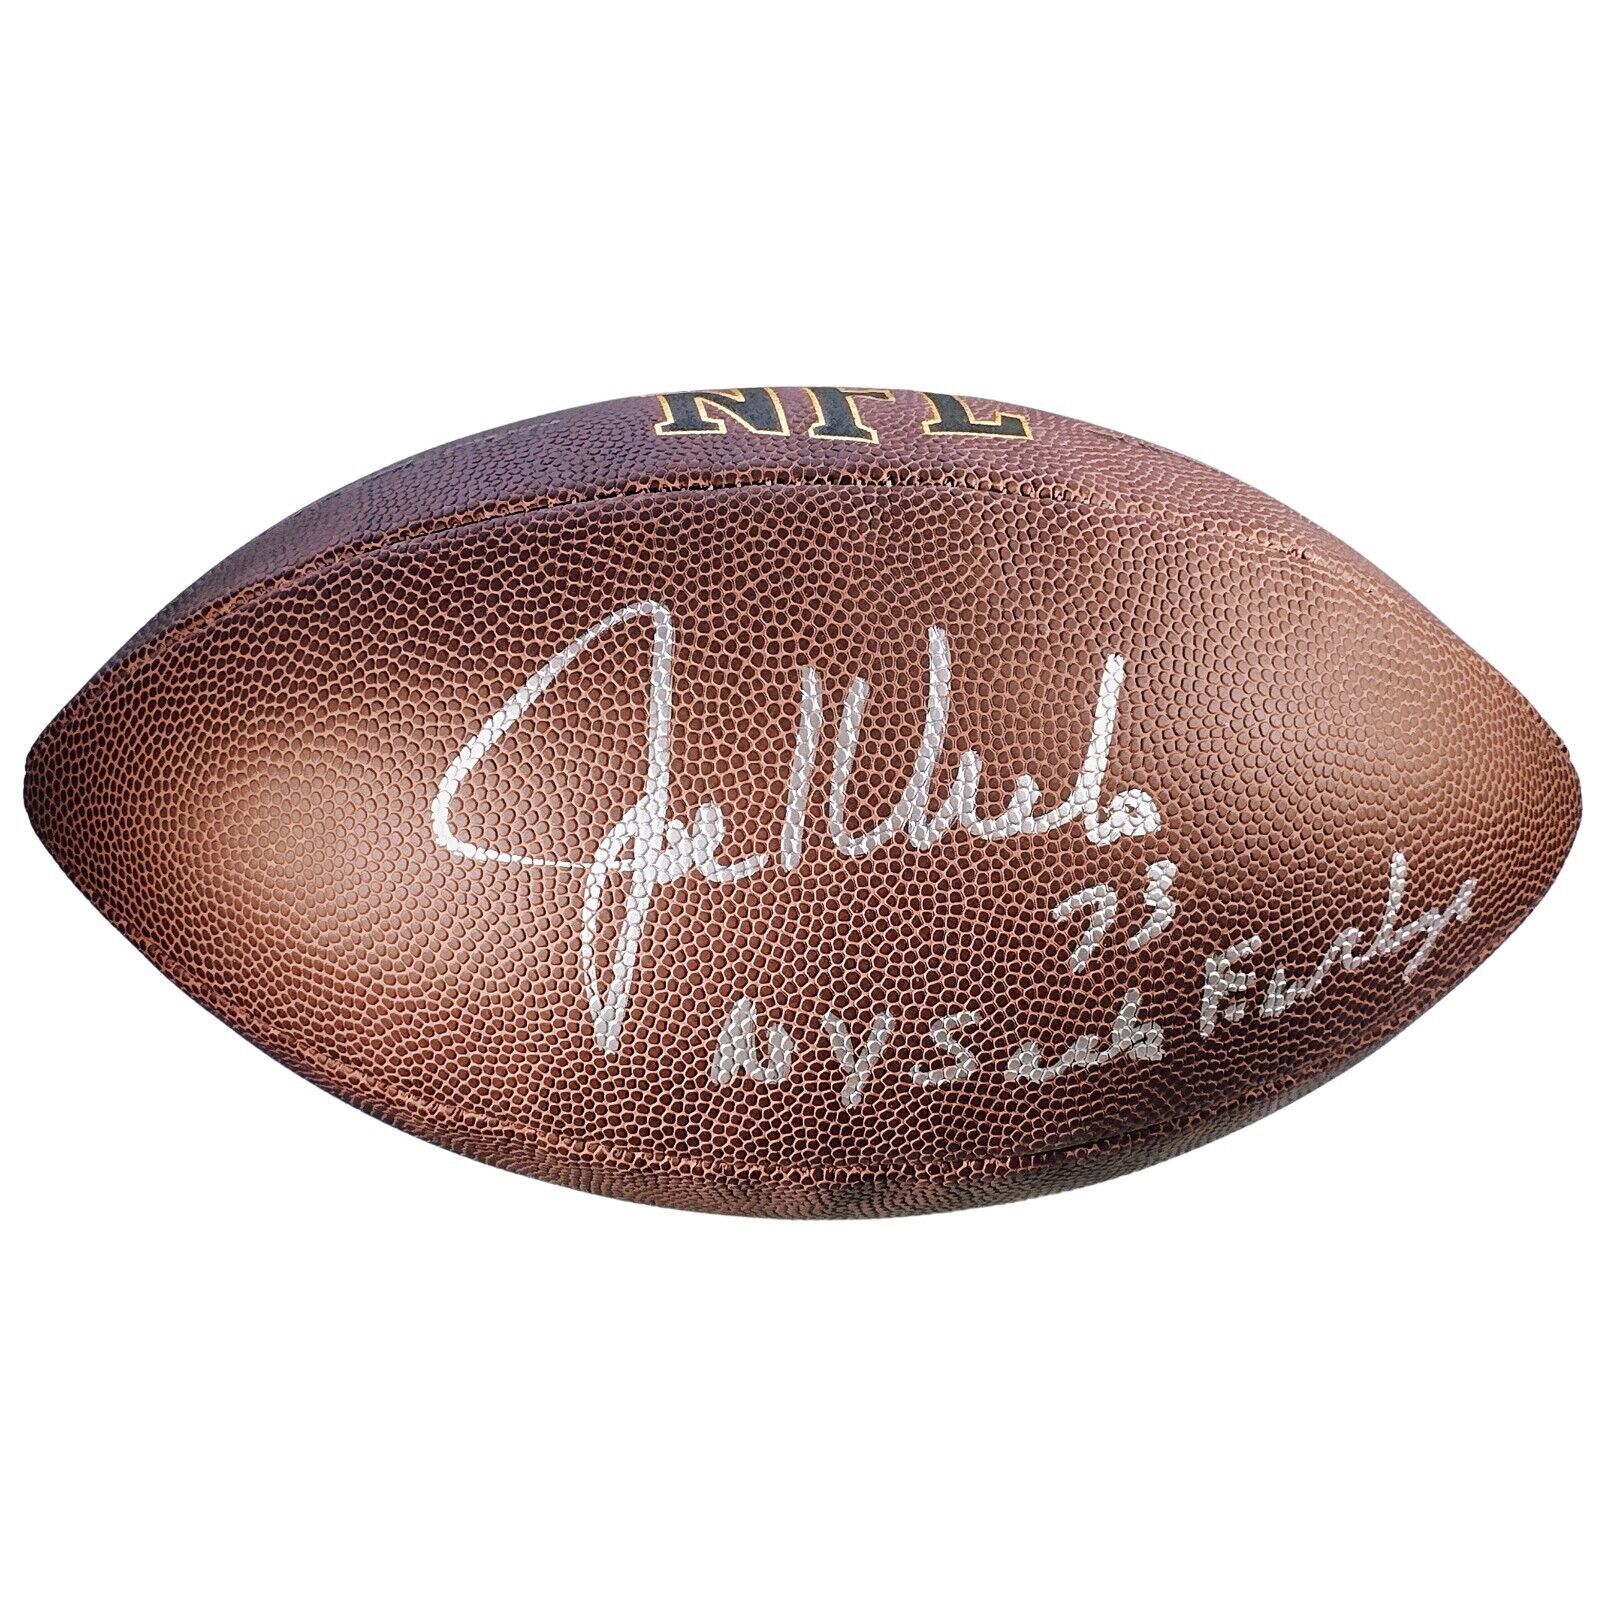 Primary image for Joe Klecko NY Jets NFL Signed Football New York Sack Exchange Proof Autograph